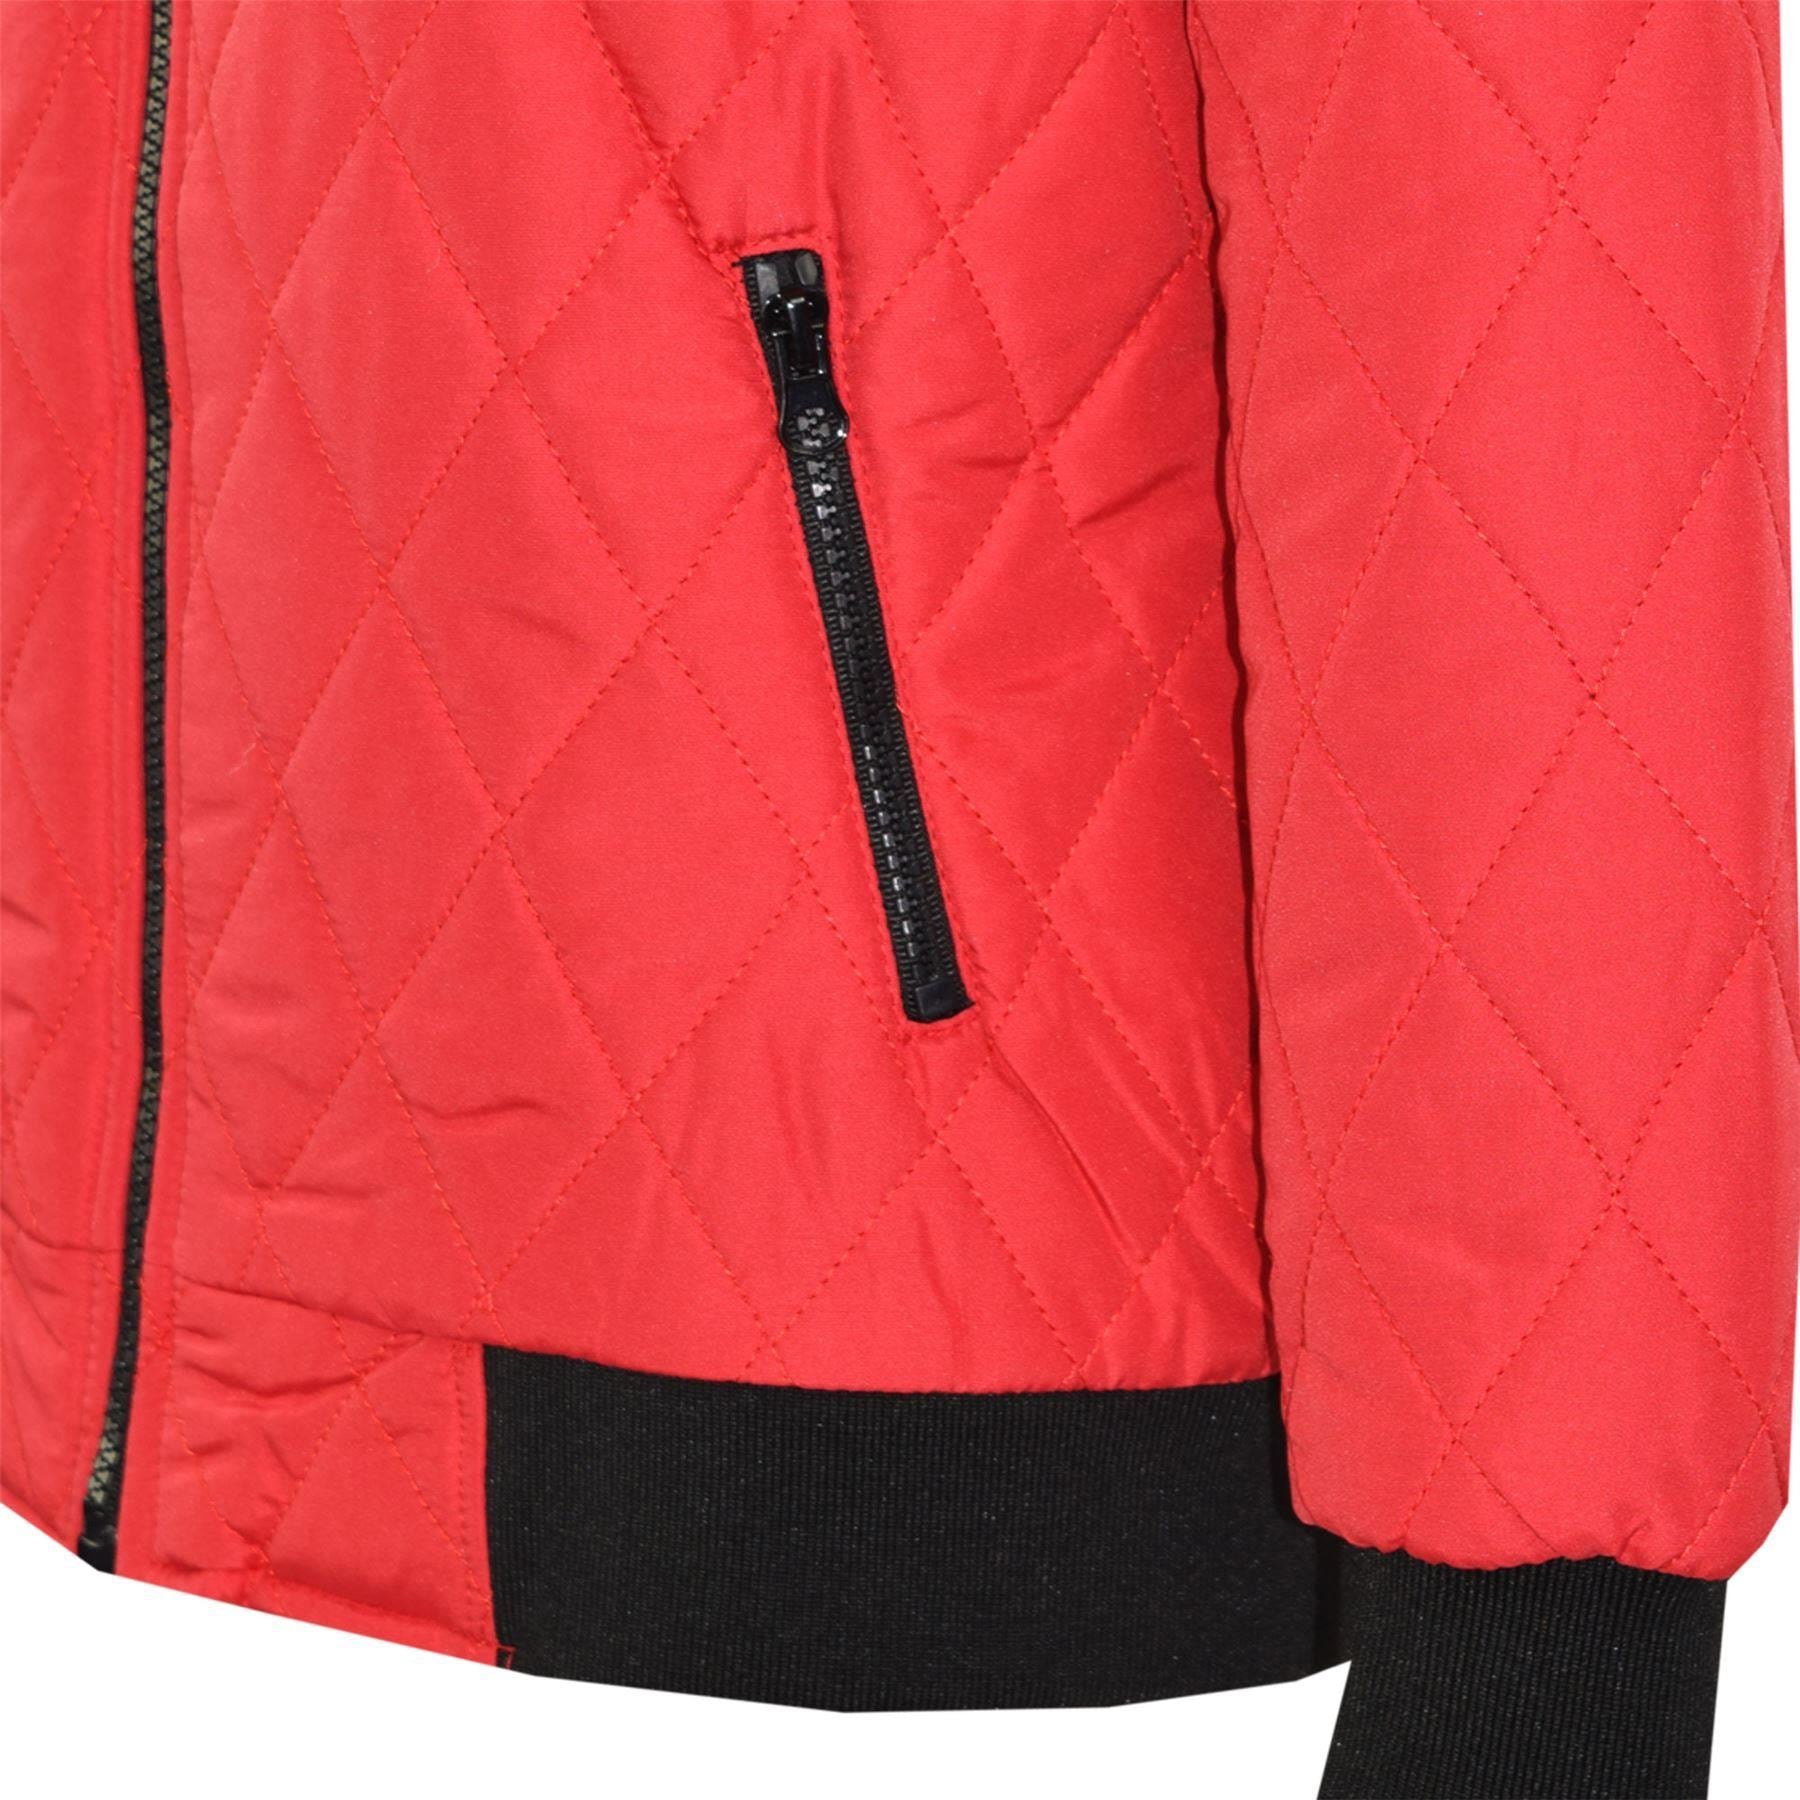 Kids Jacket Girls Boys Bomber Padded Quilted Red Jackets Coats